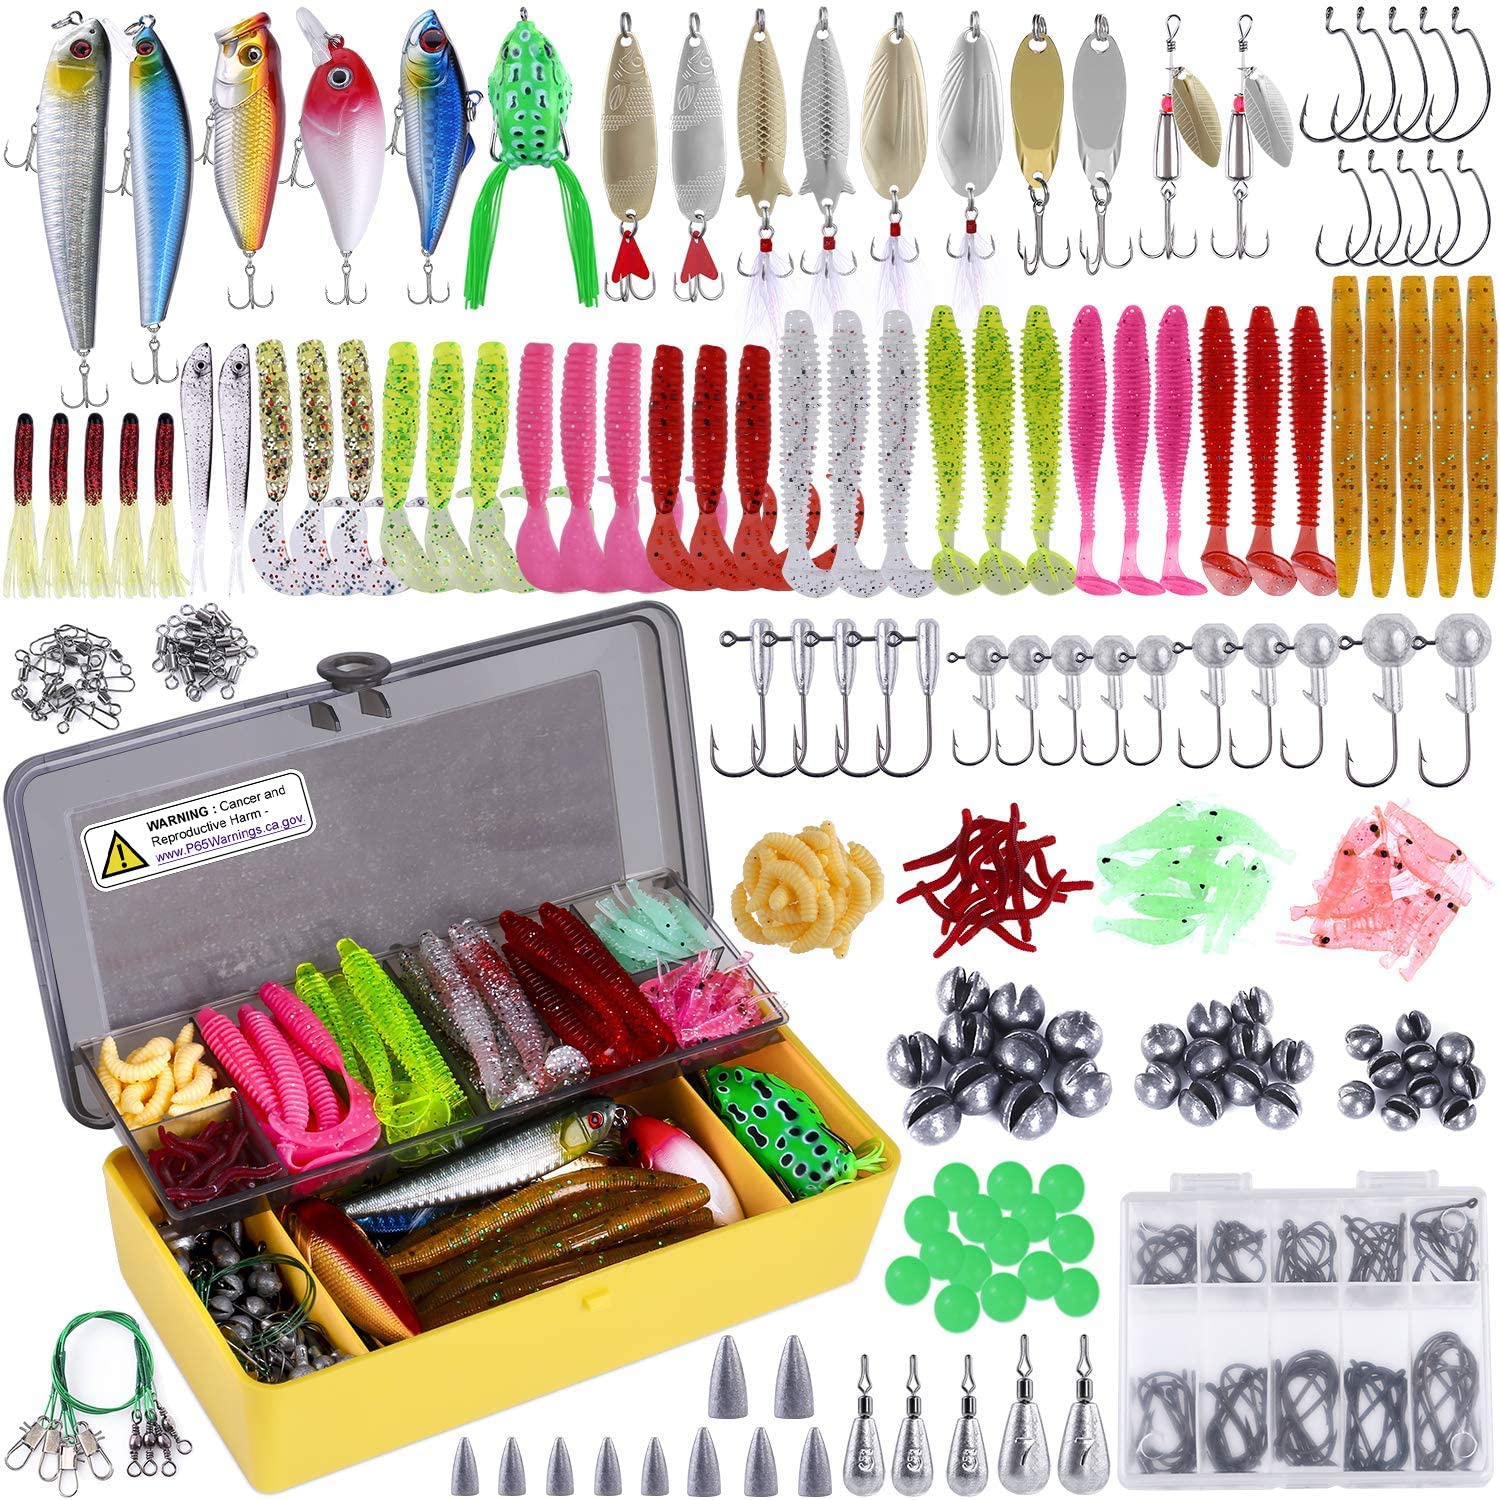 A 320 piece fishing lure set with various accessories laid out as well as a tackle box full of fishing lures and baits.